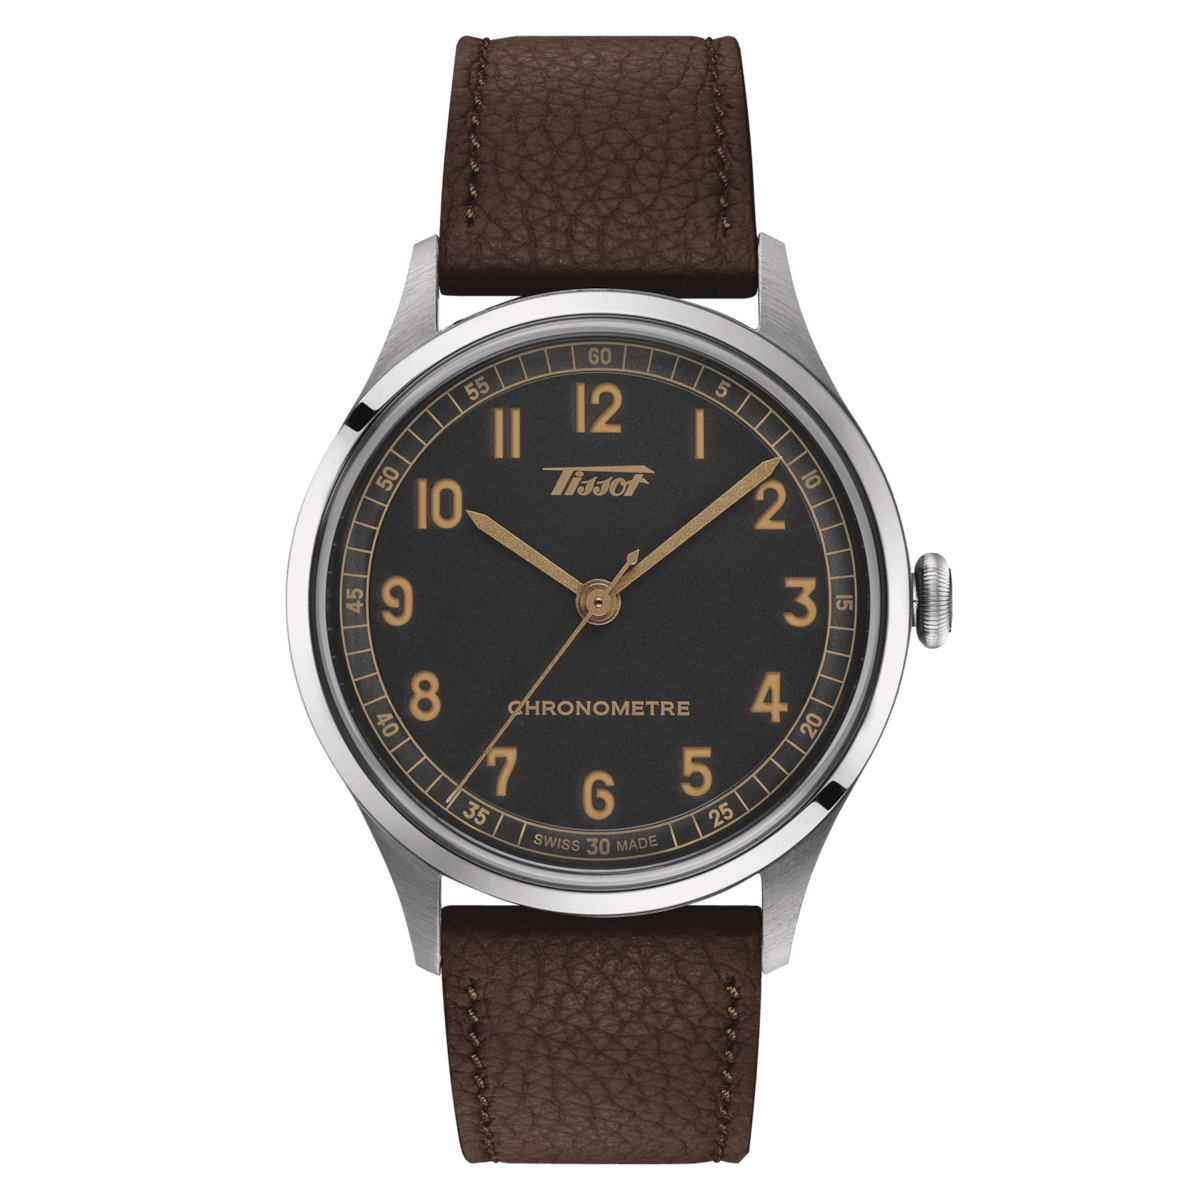 Heritage 1938 Automatic COSC